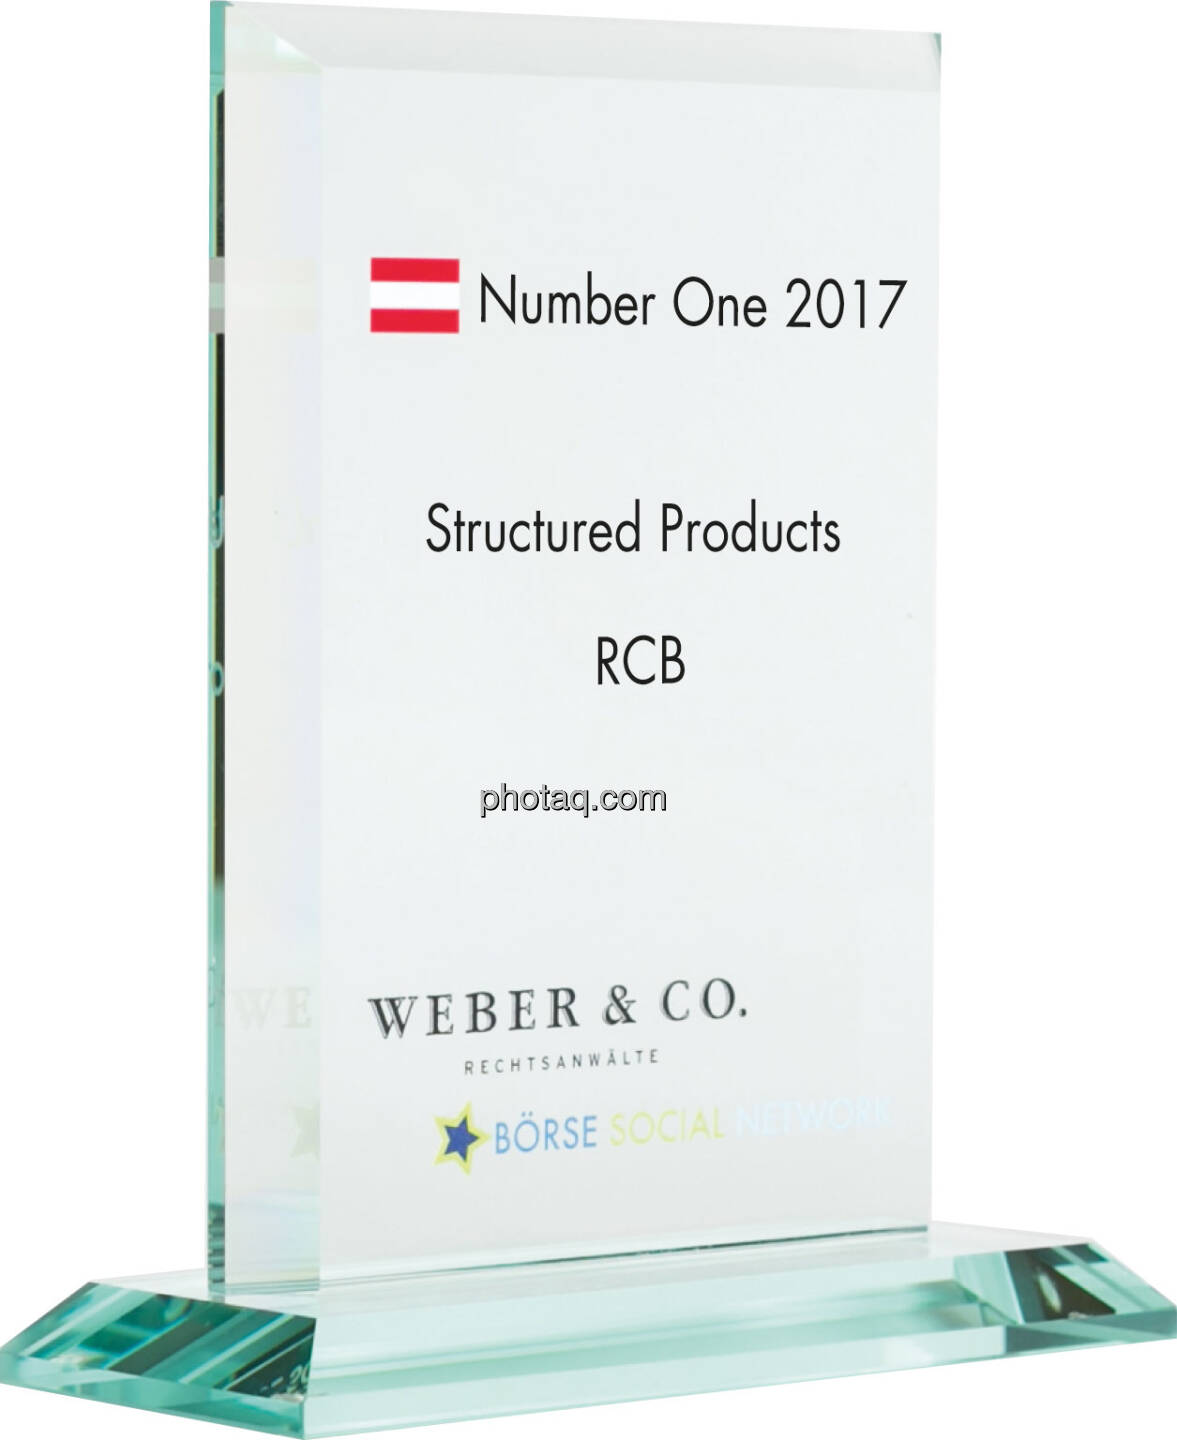 Number One Awards 2017 - Structured Products - RCB